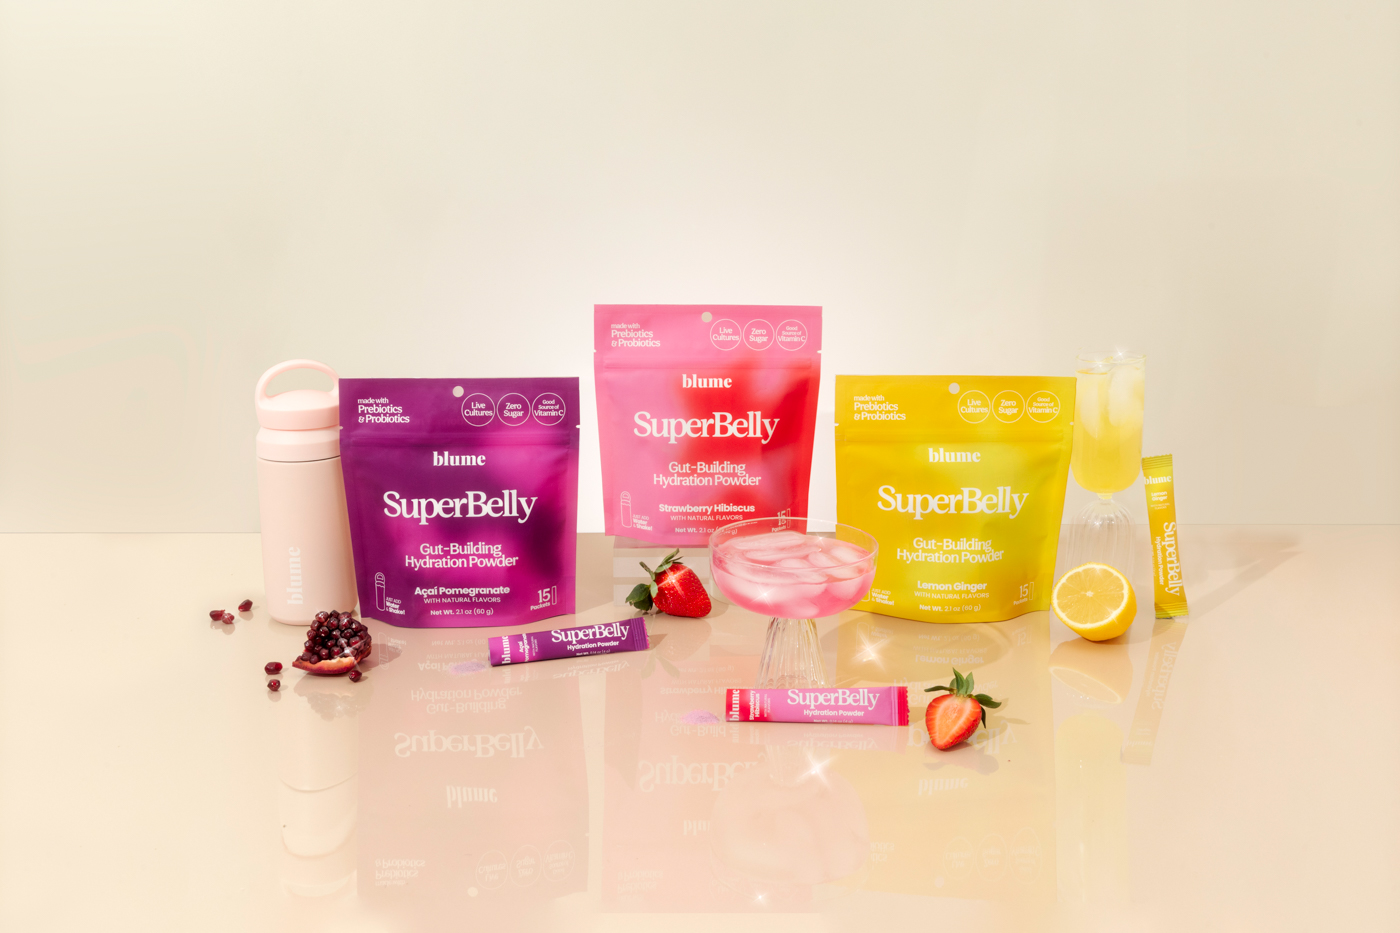 New Product Line from Blume: Grant Create SuperBelly Identity and Packaging Design